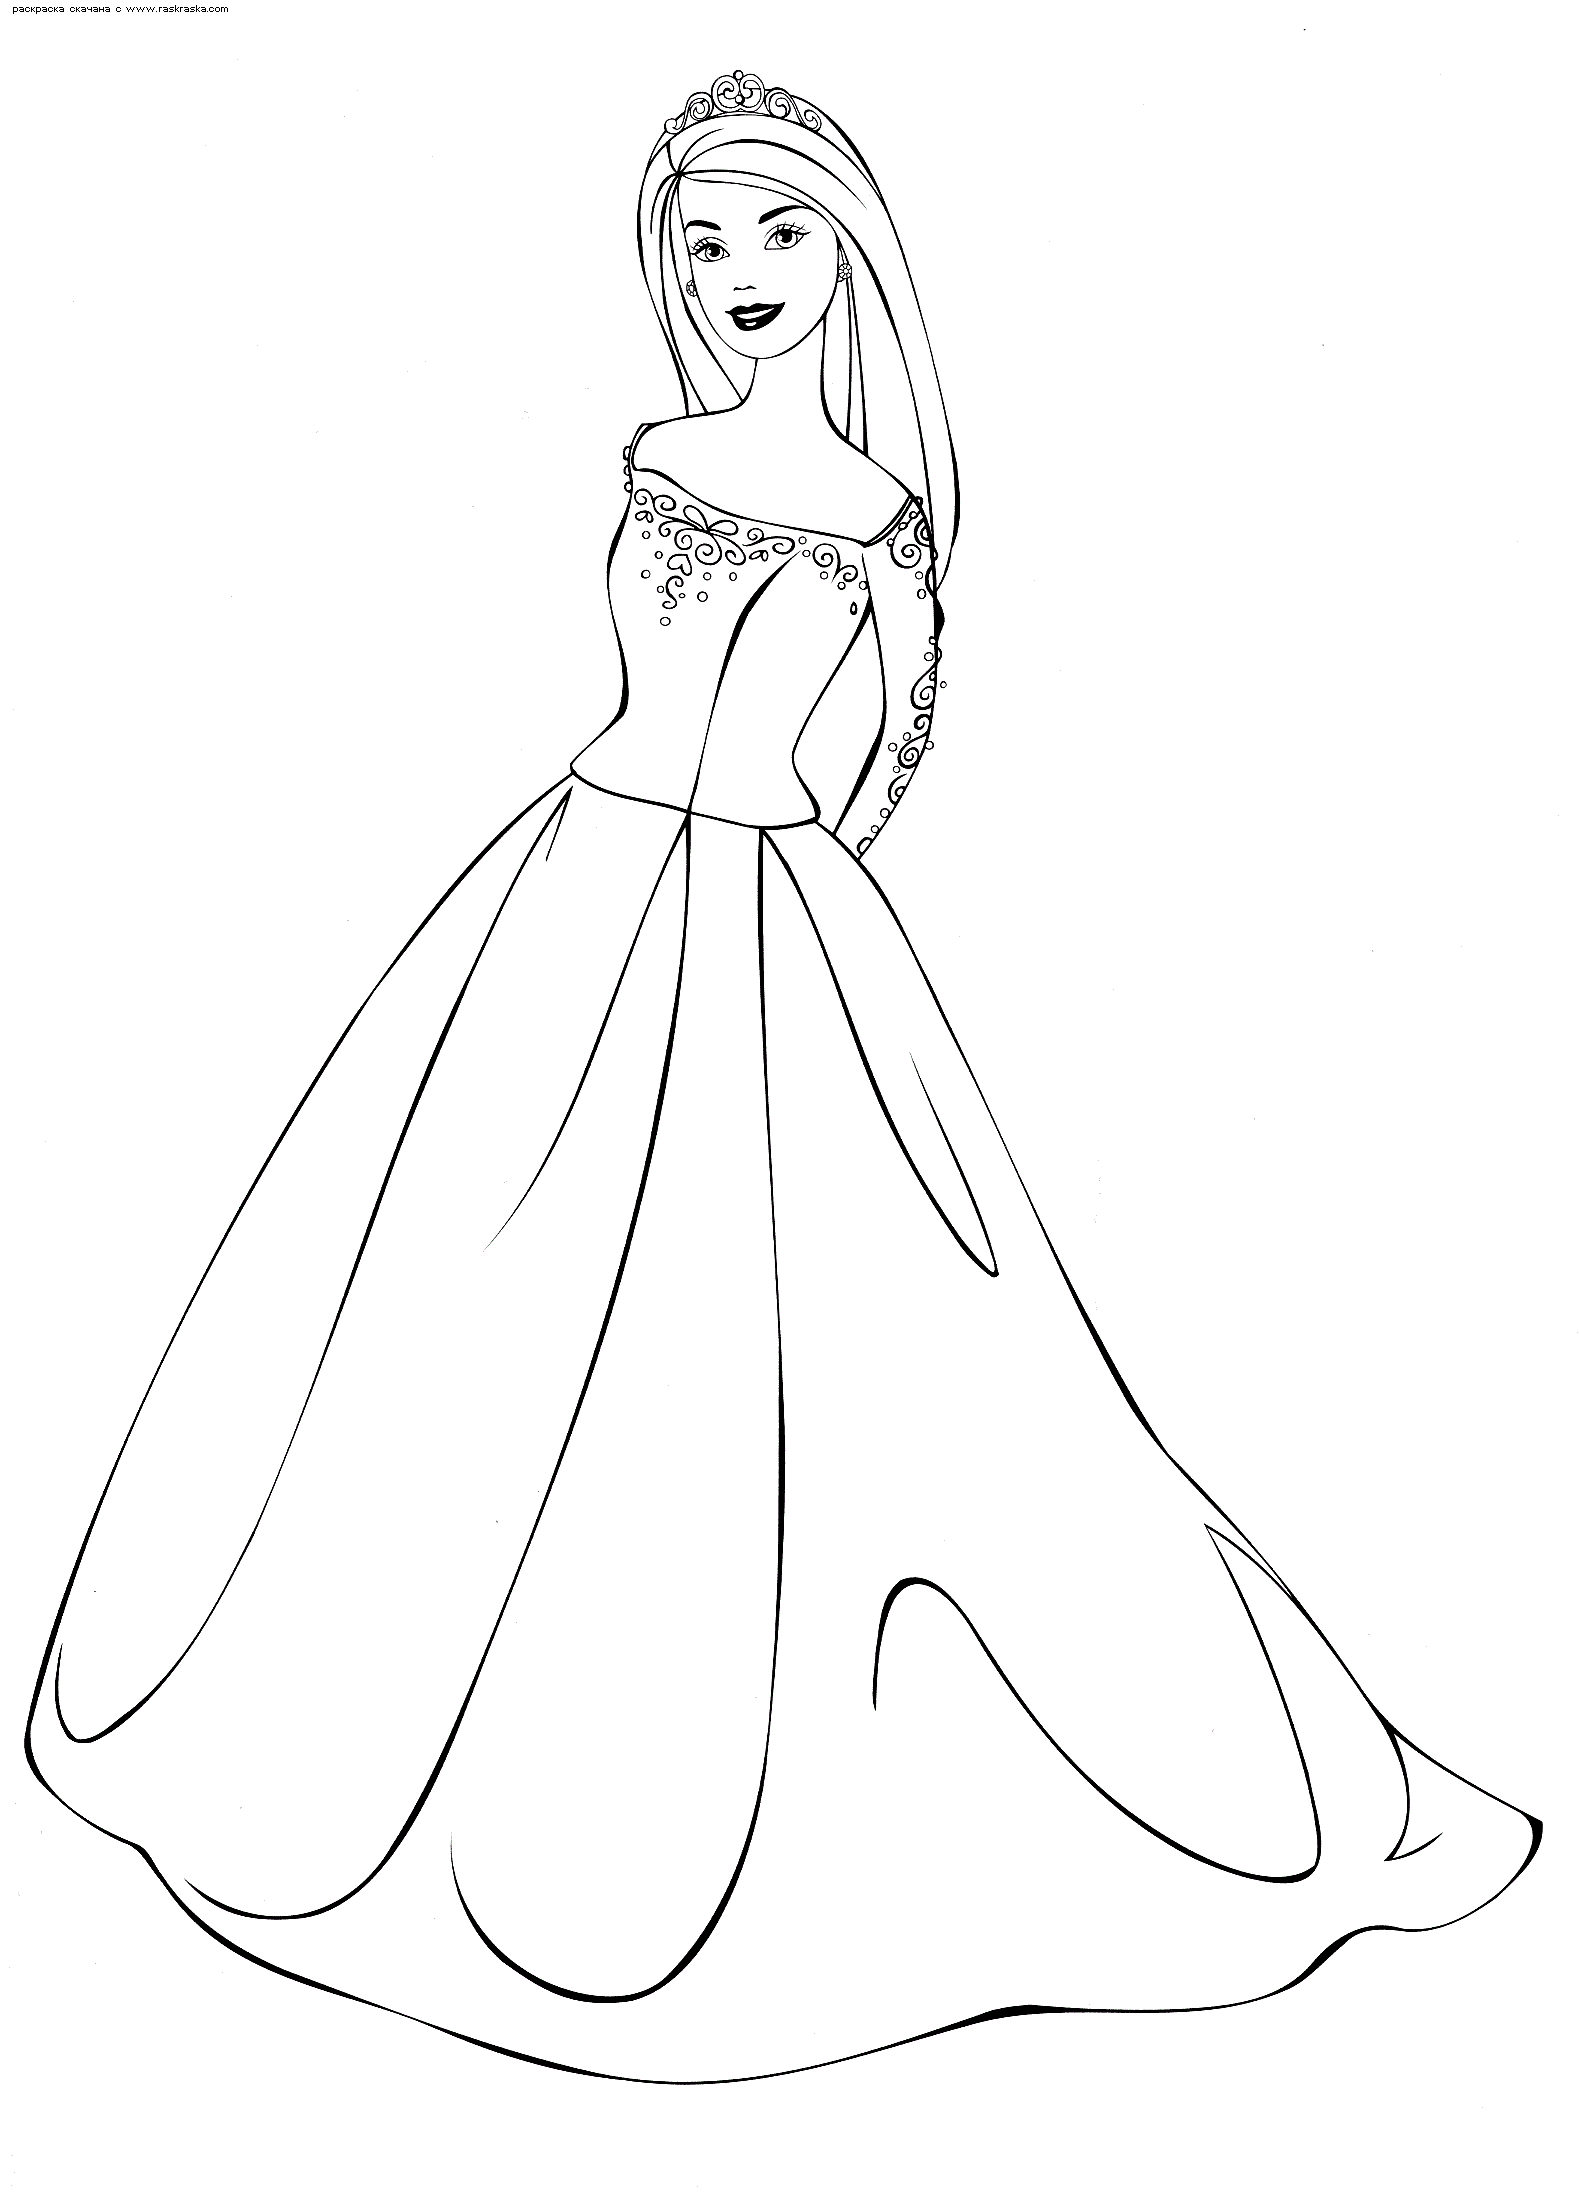 barbie doll pictures to color barbie coloring pages to print for free mermaid princess doll barbie color to pictures 